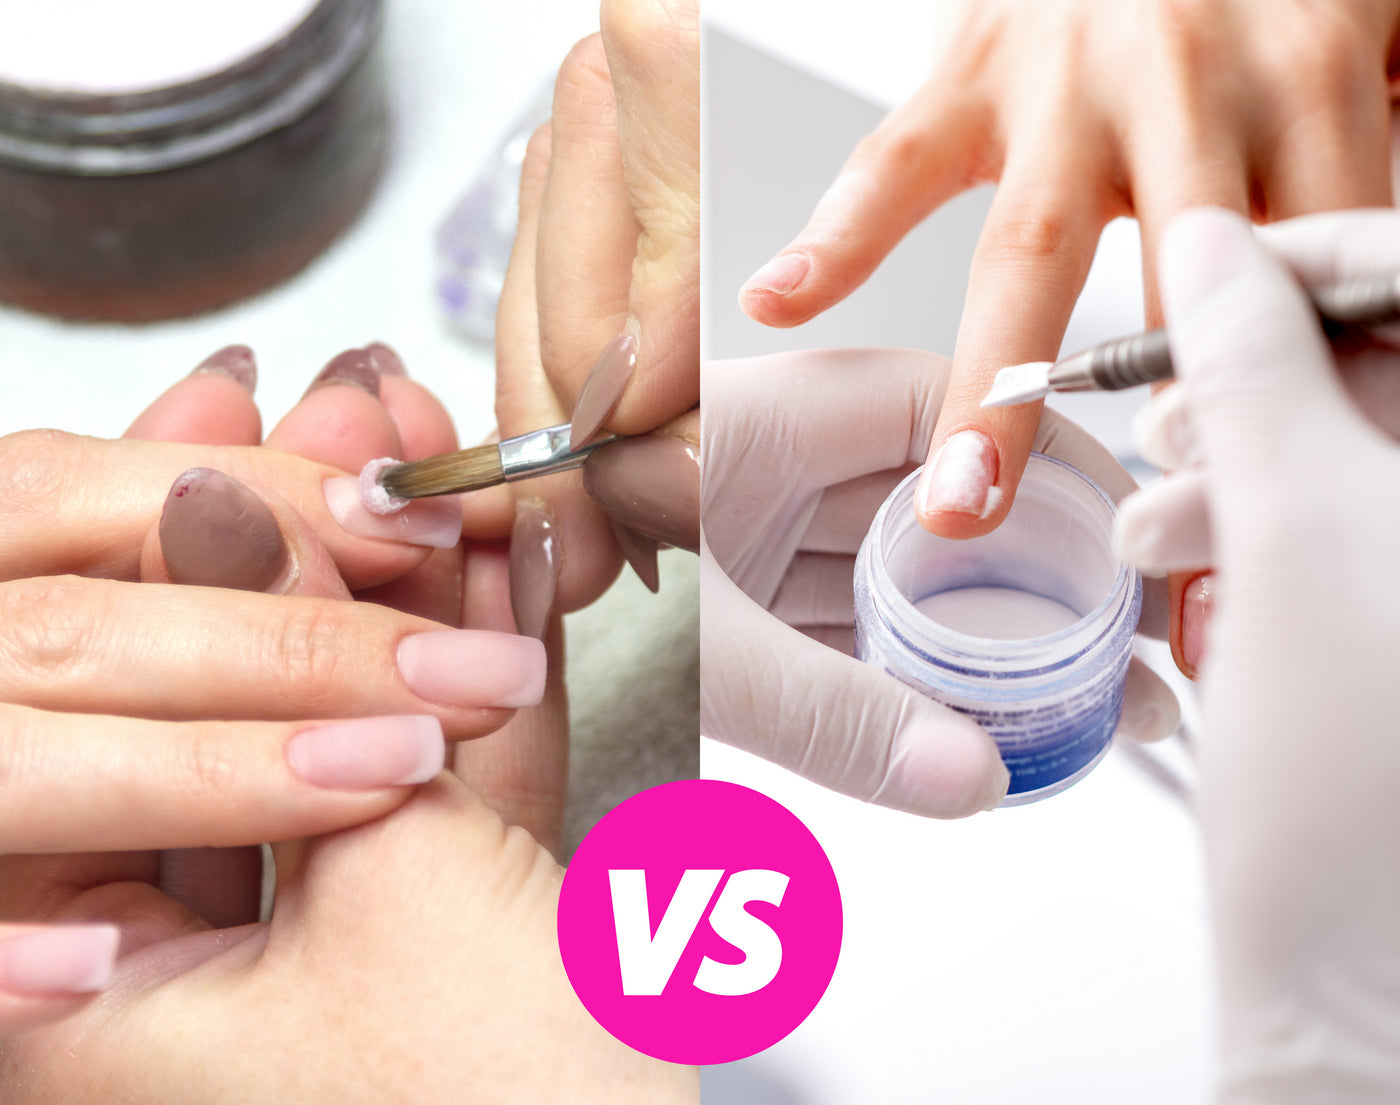 Manicure Process On Female Hand Making Nail Extension Stock Photo -  Download Image Now - iStock